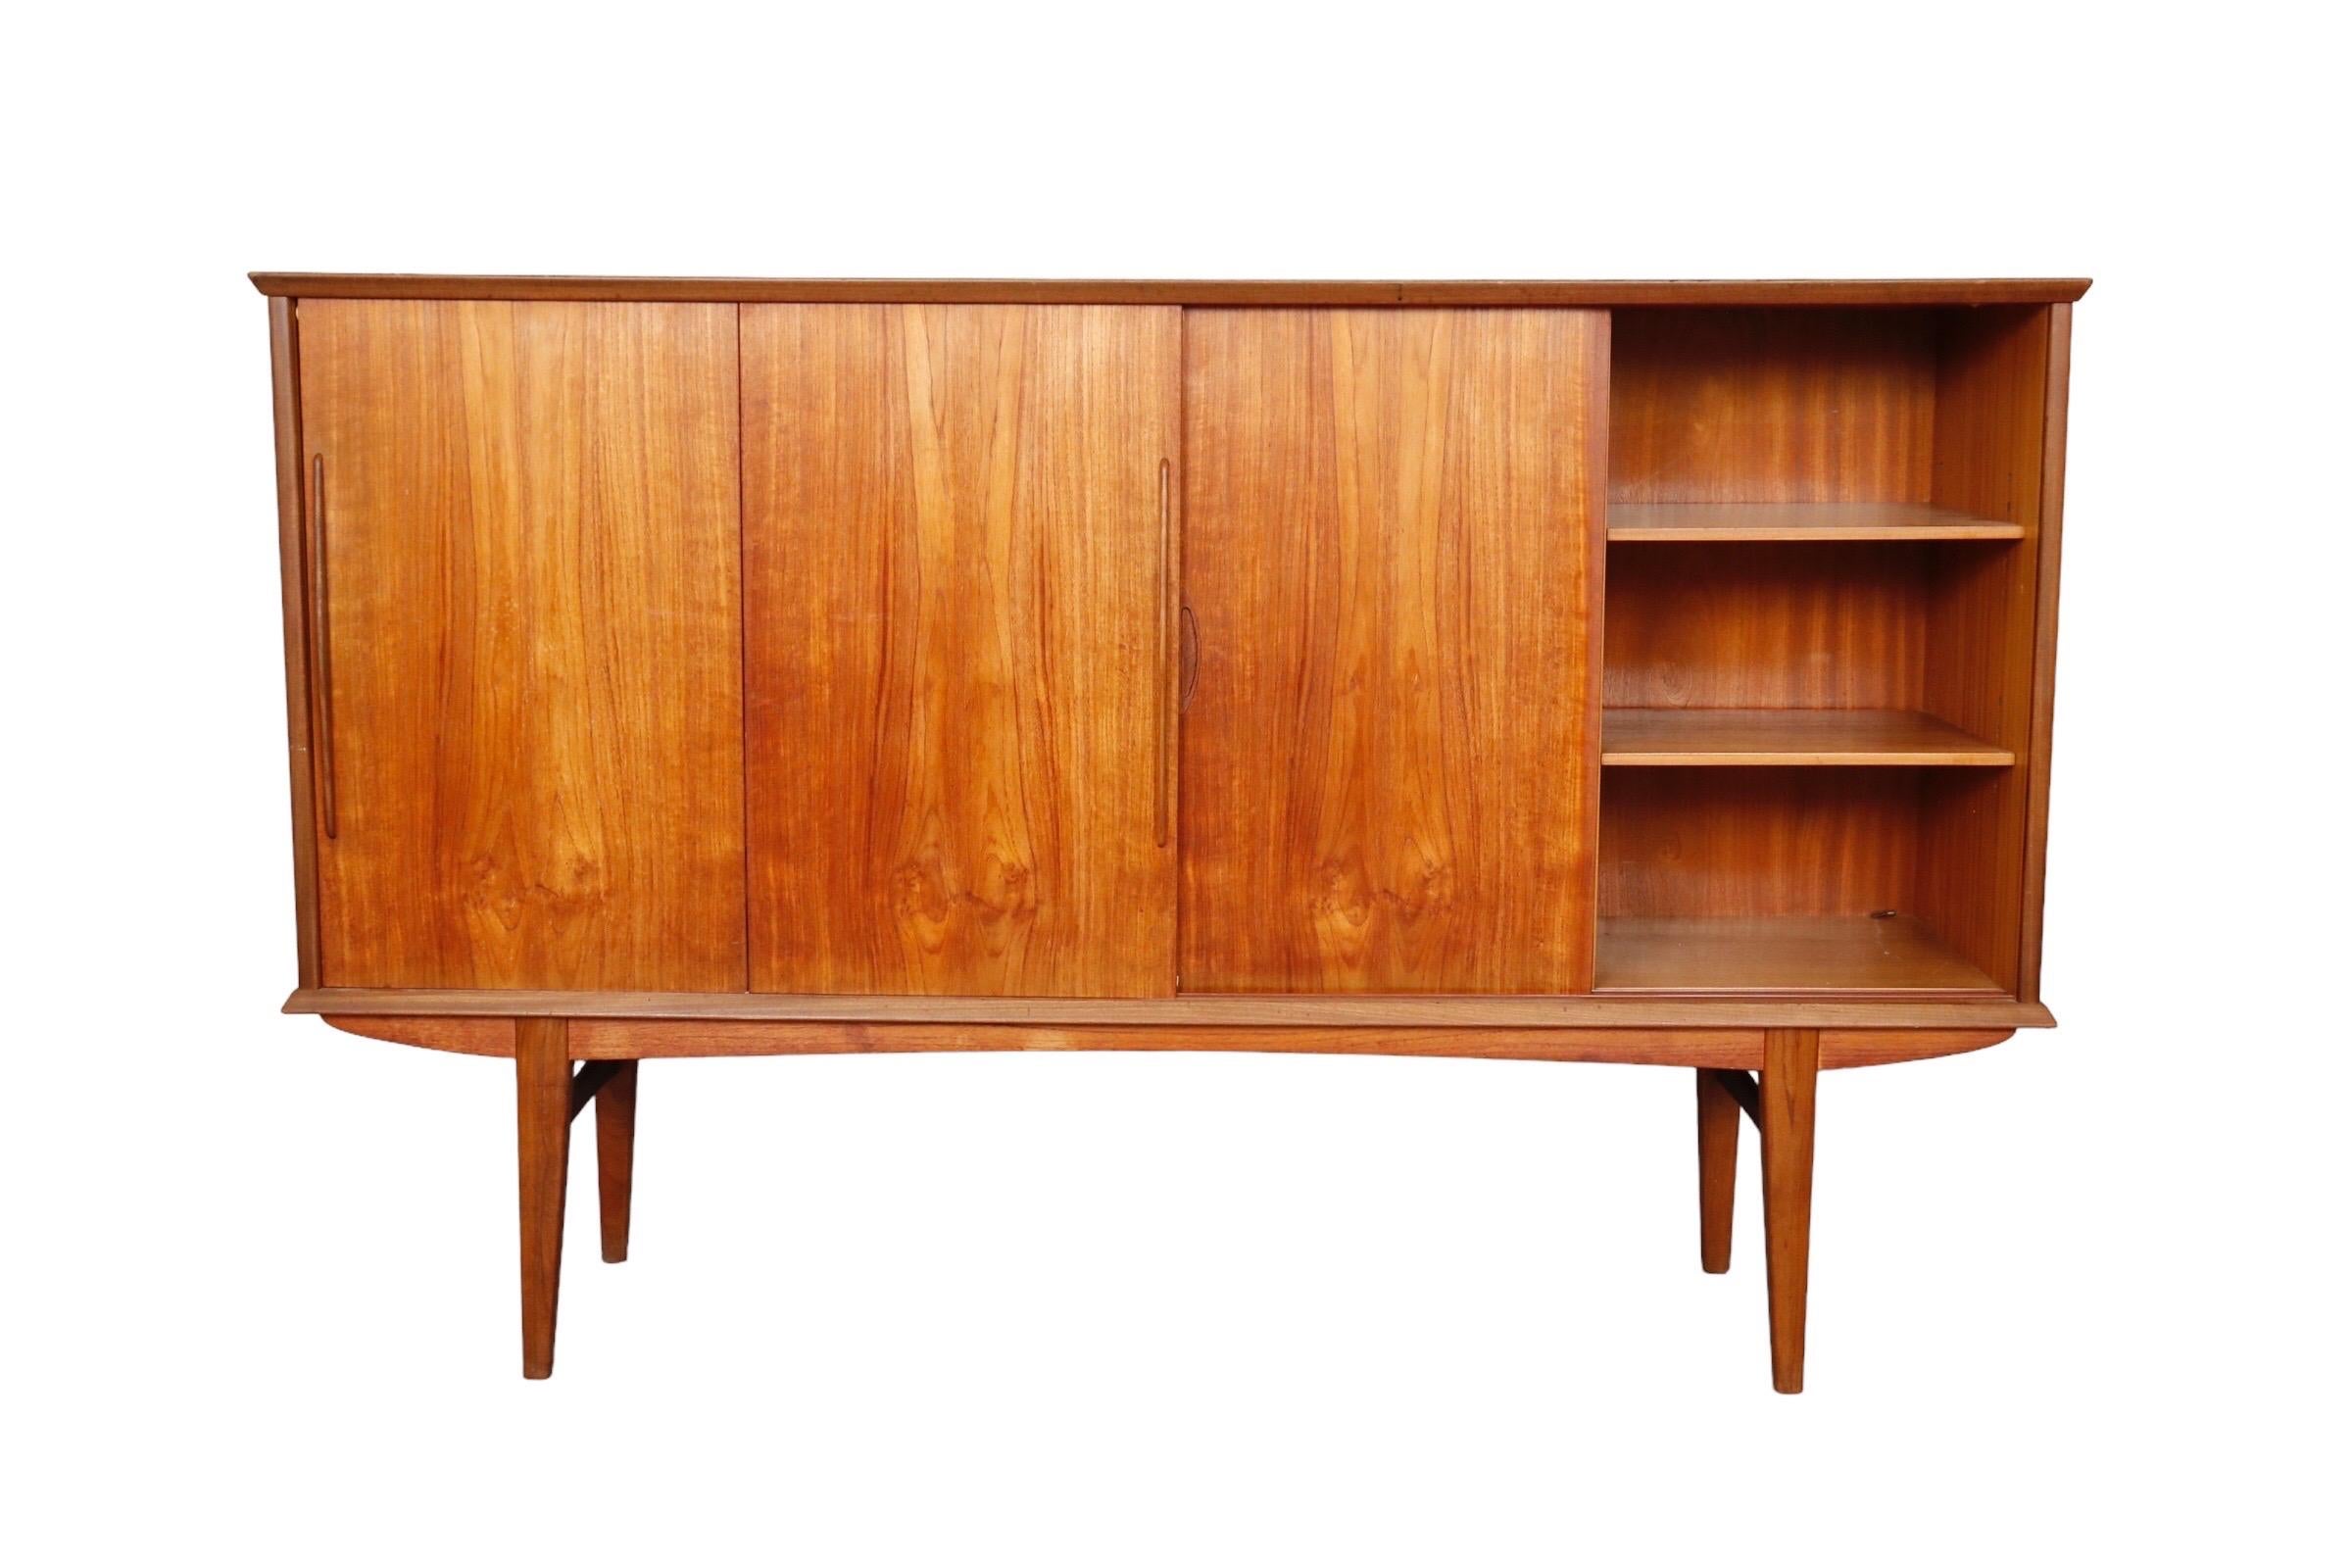 A Danish mid century modern teak buffet. Sliding cabinet doors reveal a mirrored bar area on the left above four dovetailed drawers that open with recessed handles. Drawer fronts are decorated with matching veneers. Storage compartments to the right